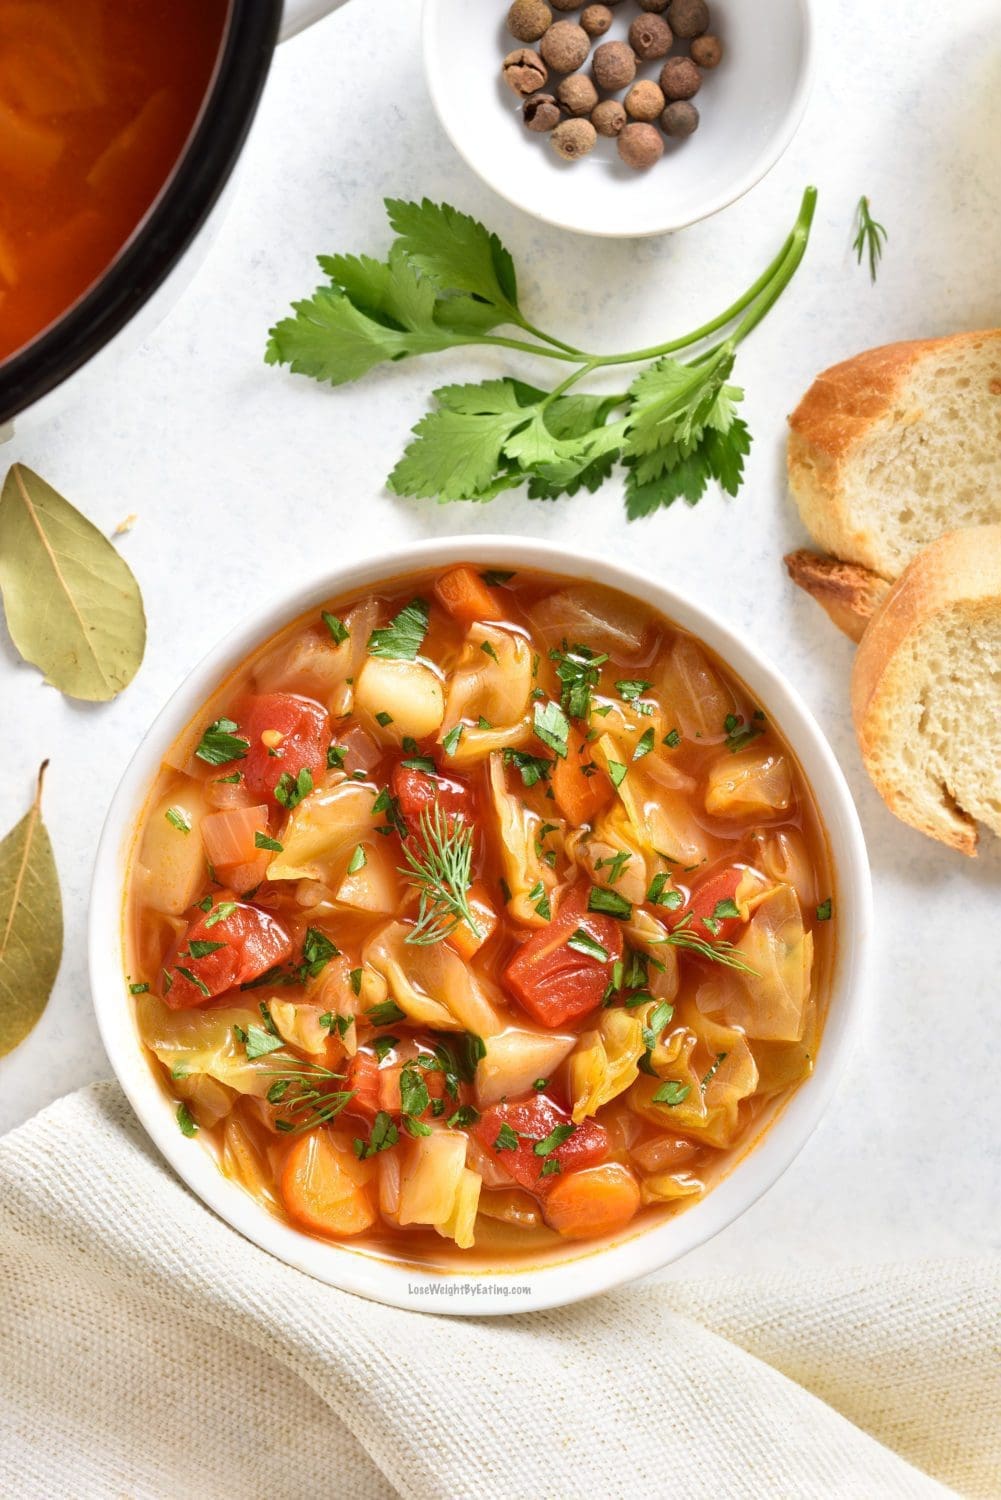 diet cabbage soup recipes